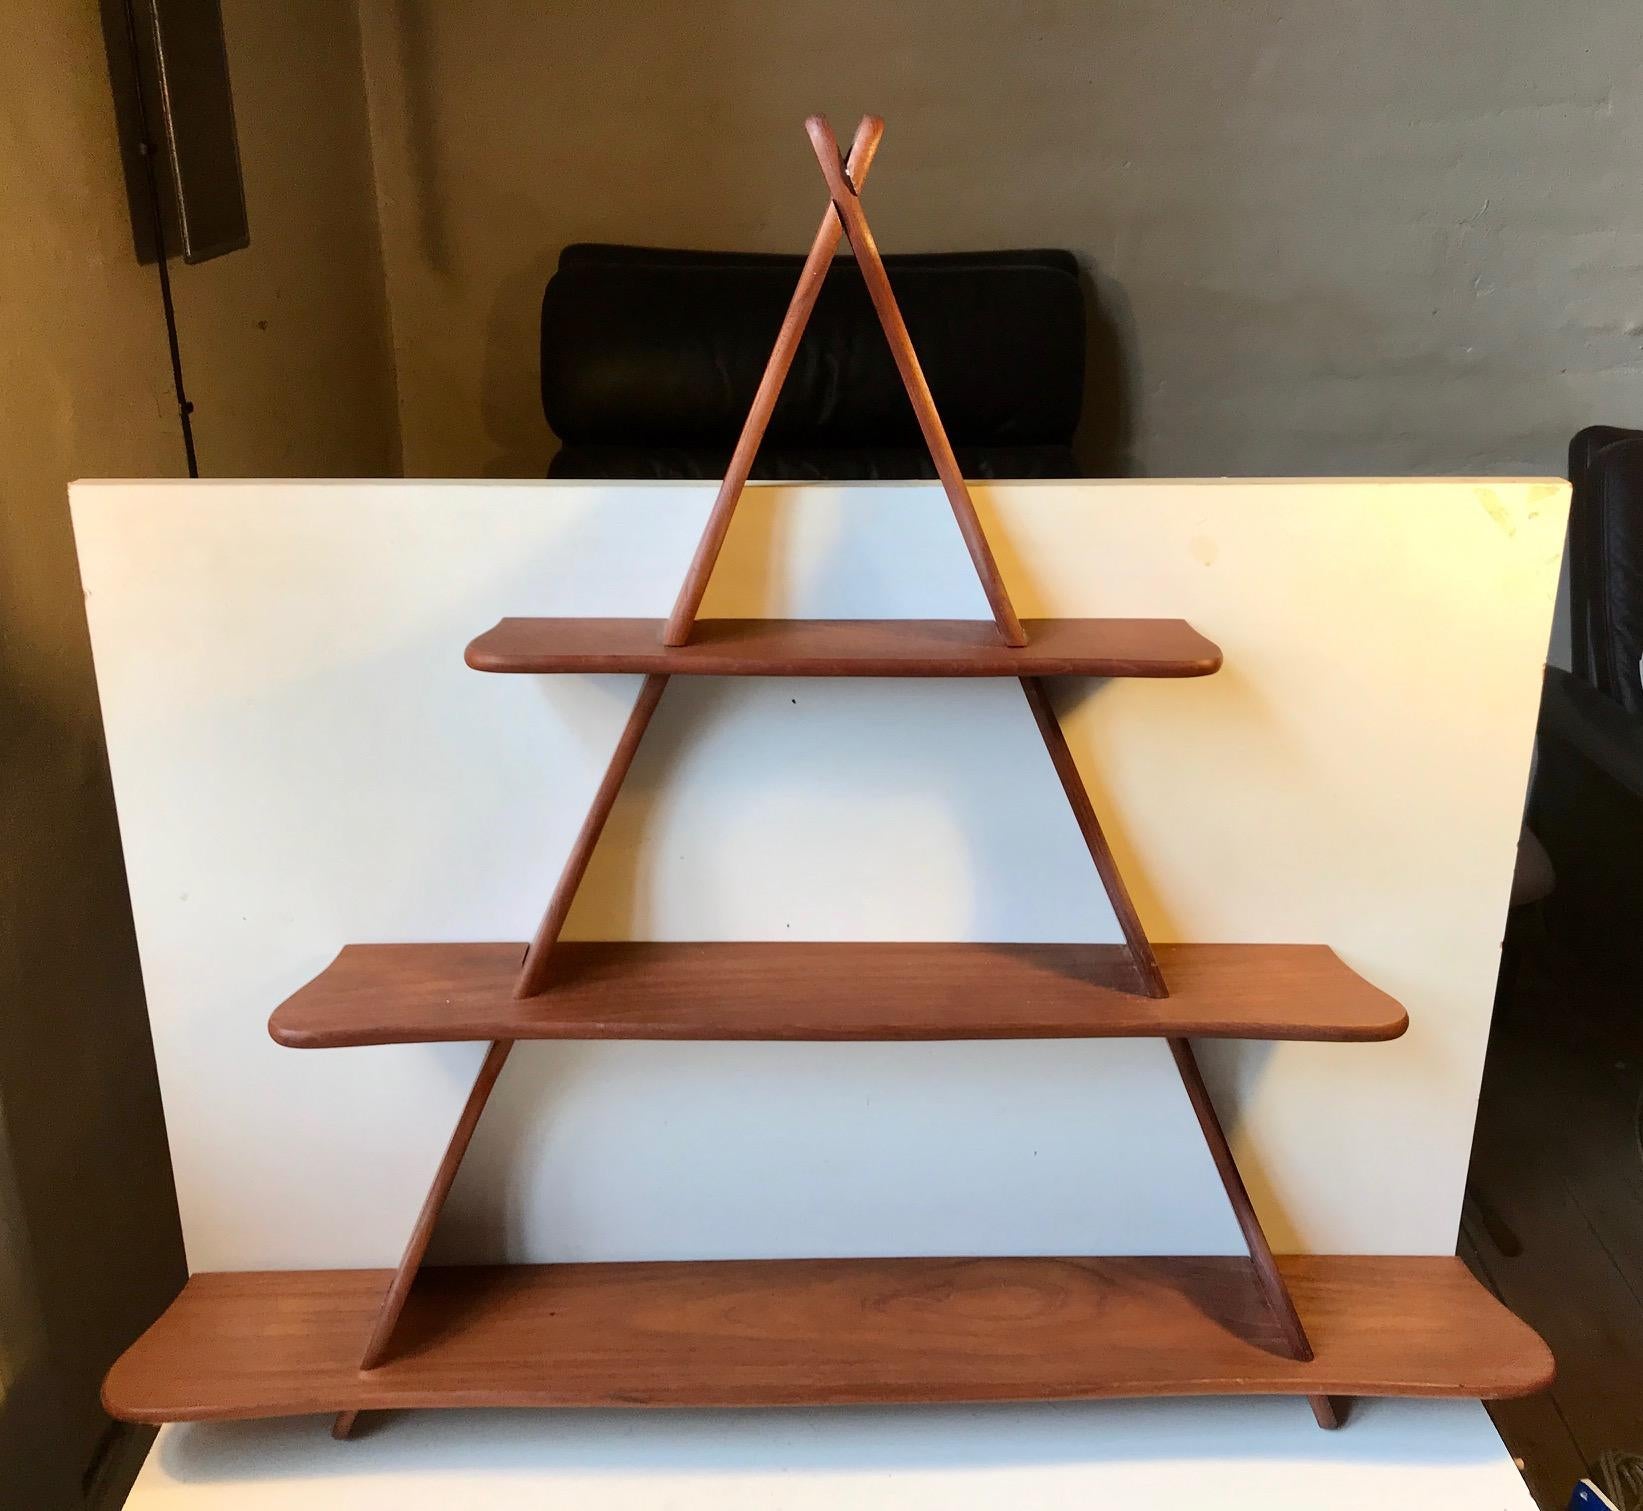 Triangular shelving unit with rounded profiles designed by Peder Moos in collaboration with his students at the architect’s school in Copenhagen. Suitable as spice rack or for display of small collectibles. It is assembled without the use of